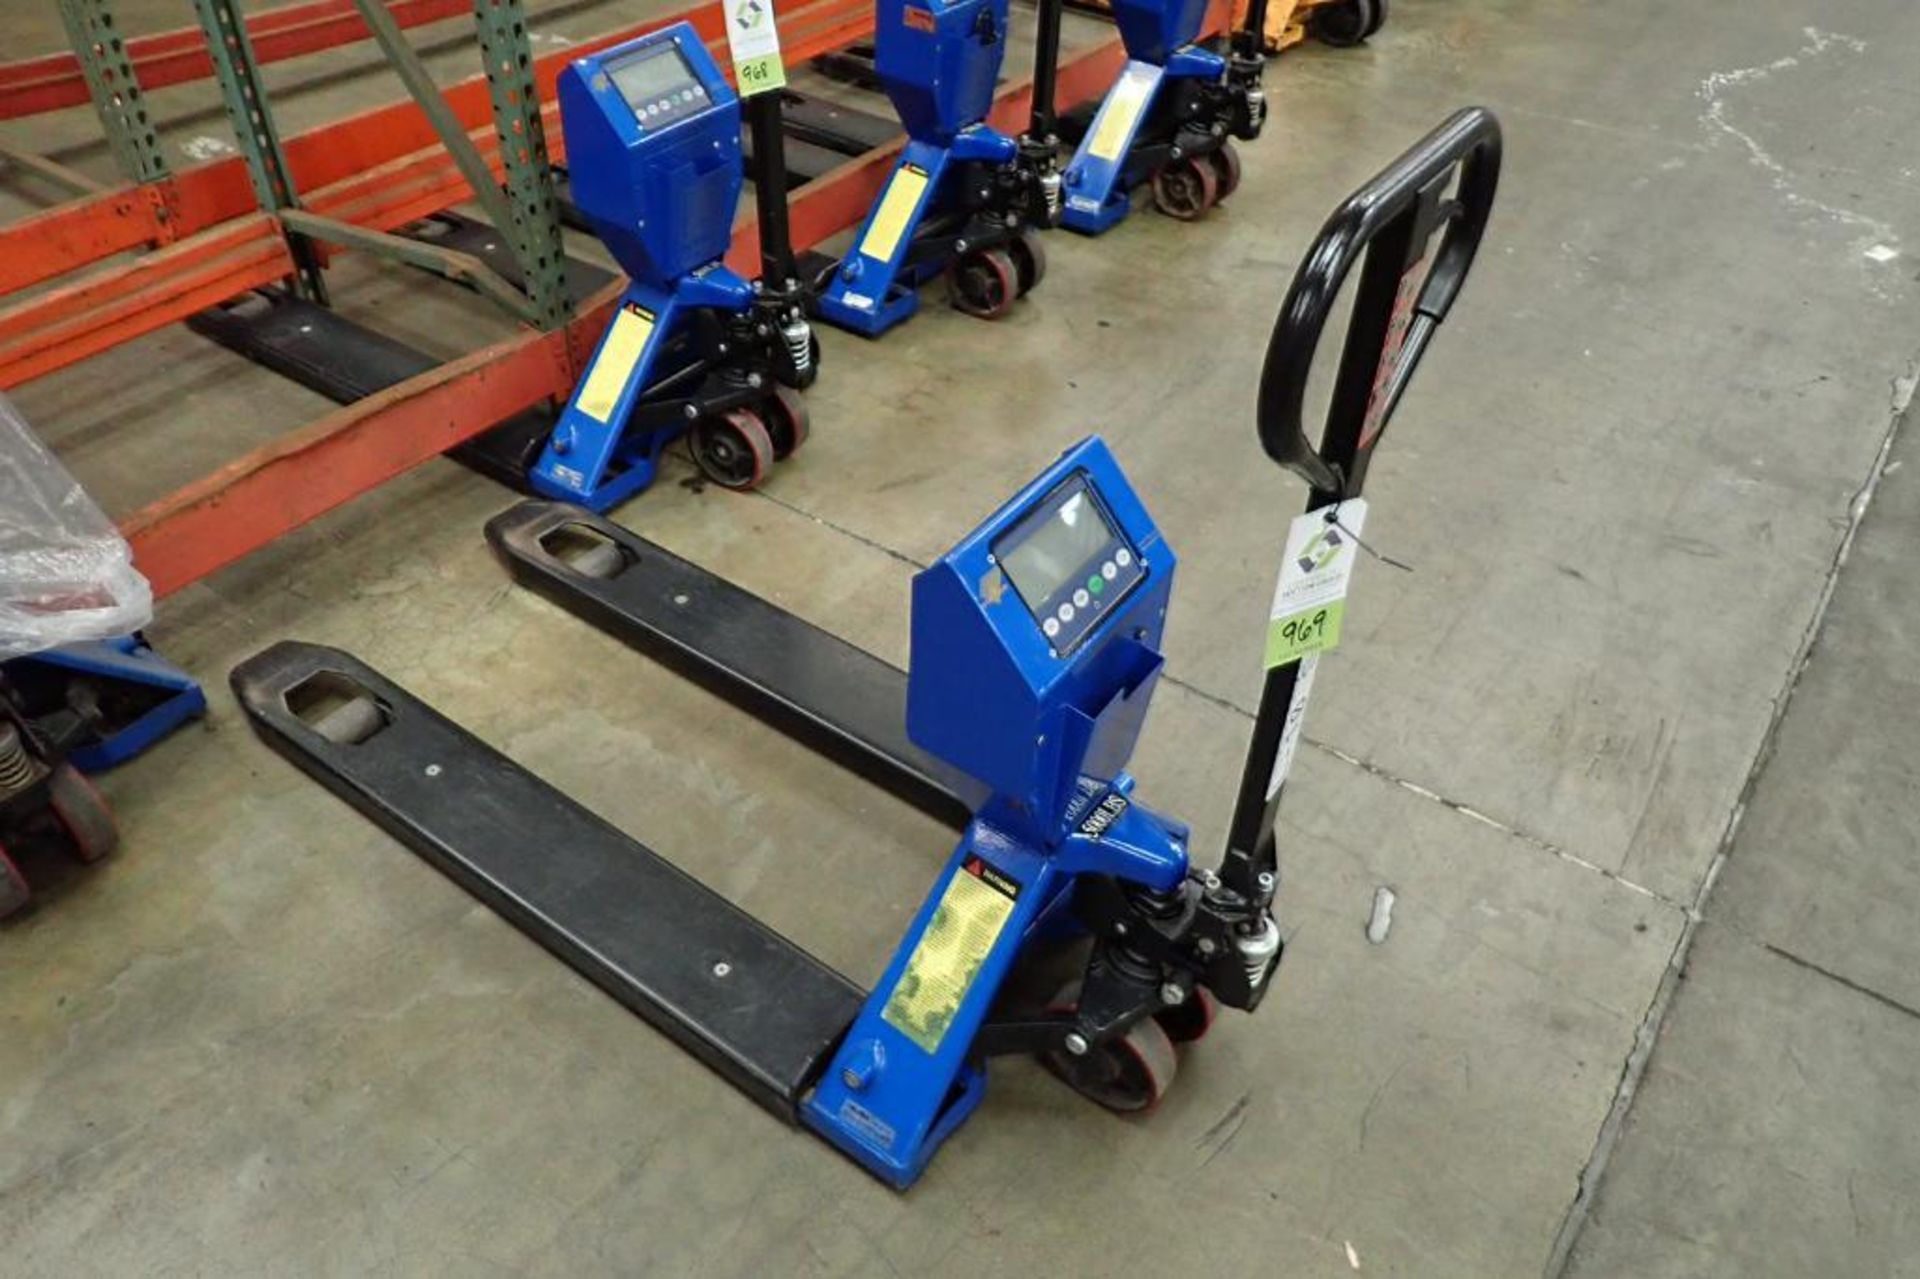 Global Industrial hand pallet jack, SN 382317, with Mettler Toledo on board scale, 5000 lb capacity,